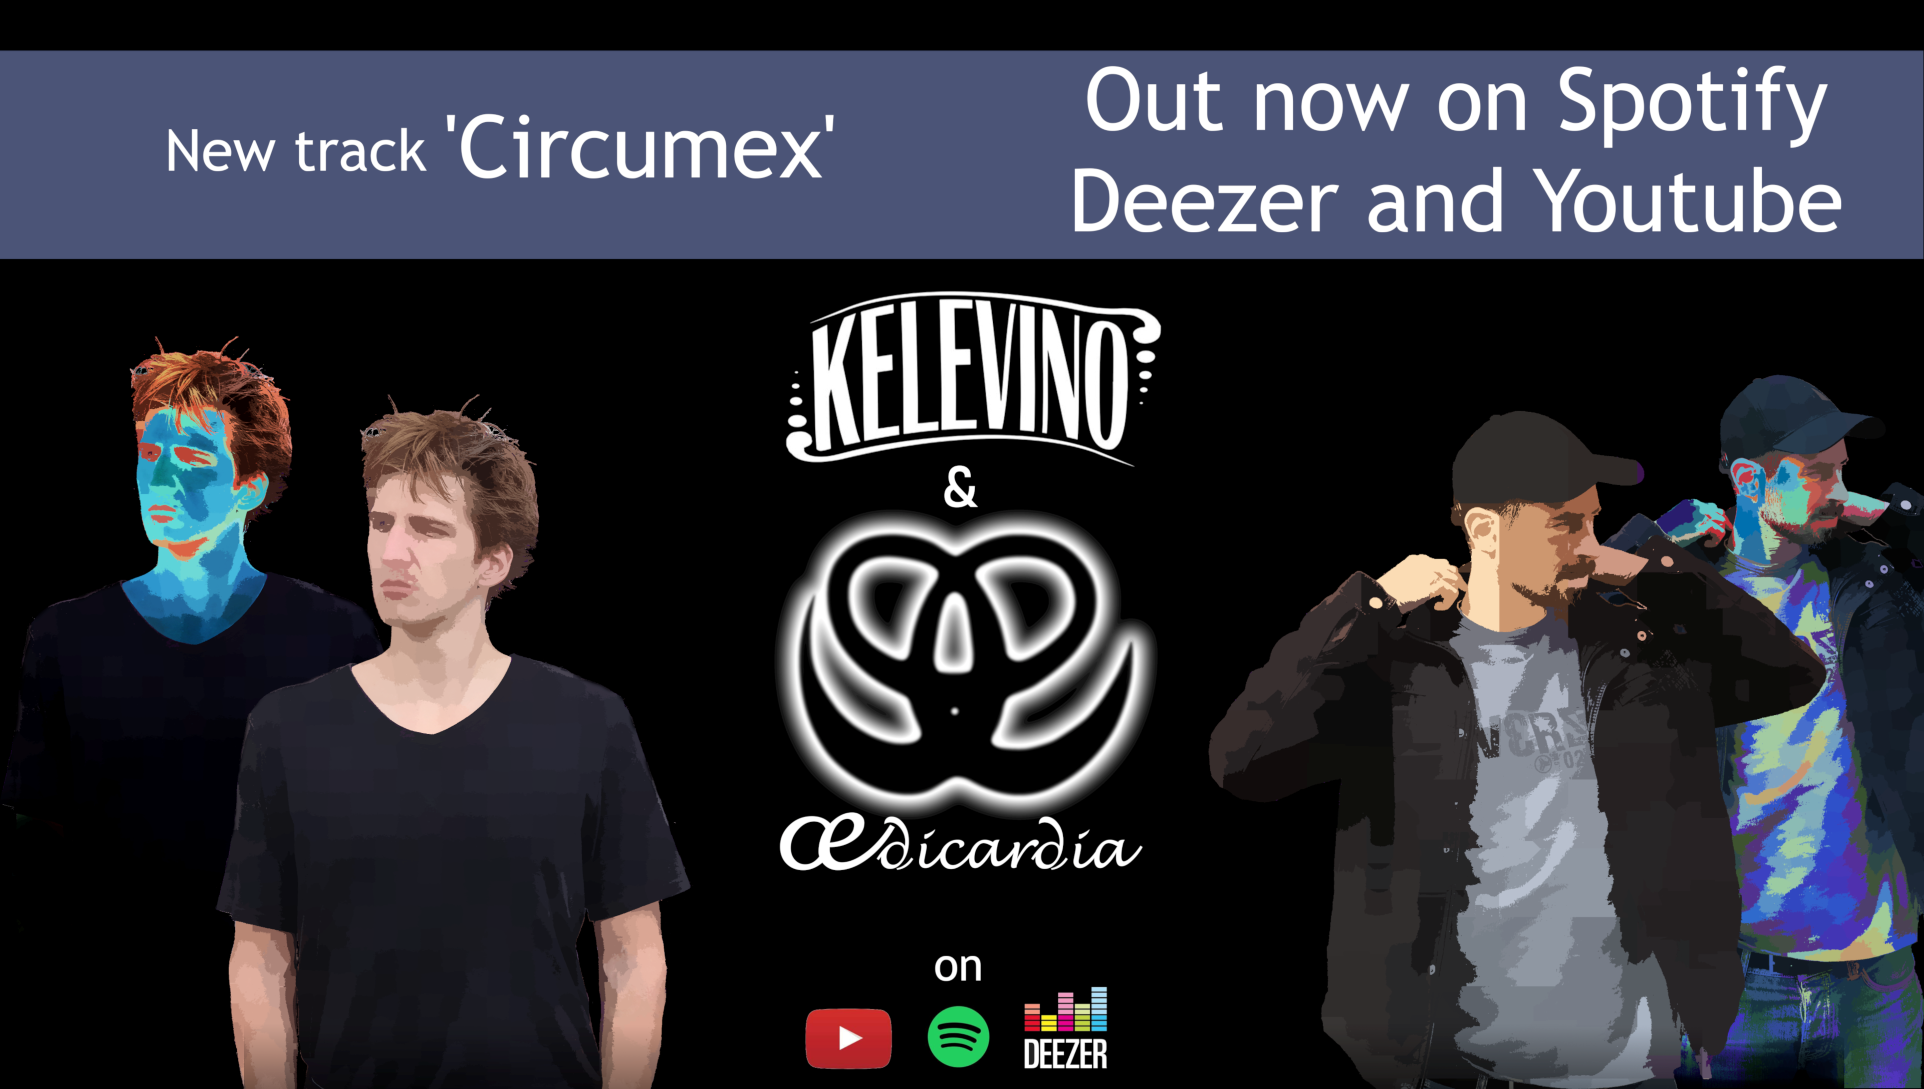 Kelevino stands on the left while Œdicardia is on the right and is putting his jacket on. Both look outwards. Both are shown with image FX’s and have behind a duplicate of themselves with other FX’s. The background is black. The logos are in white.